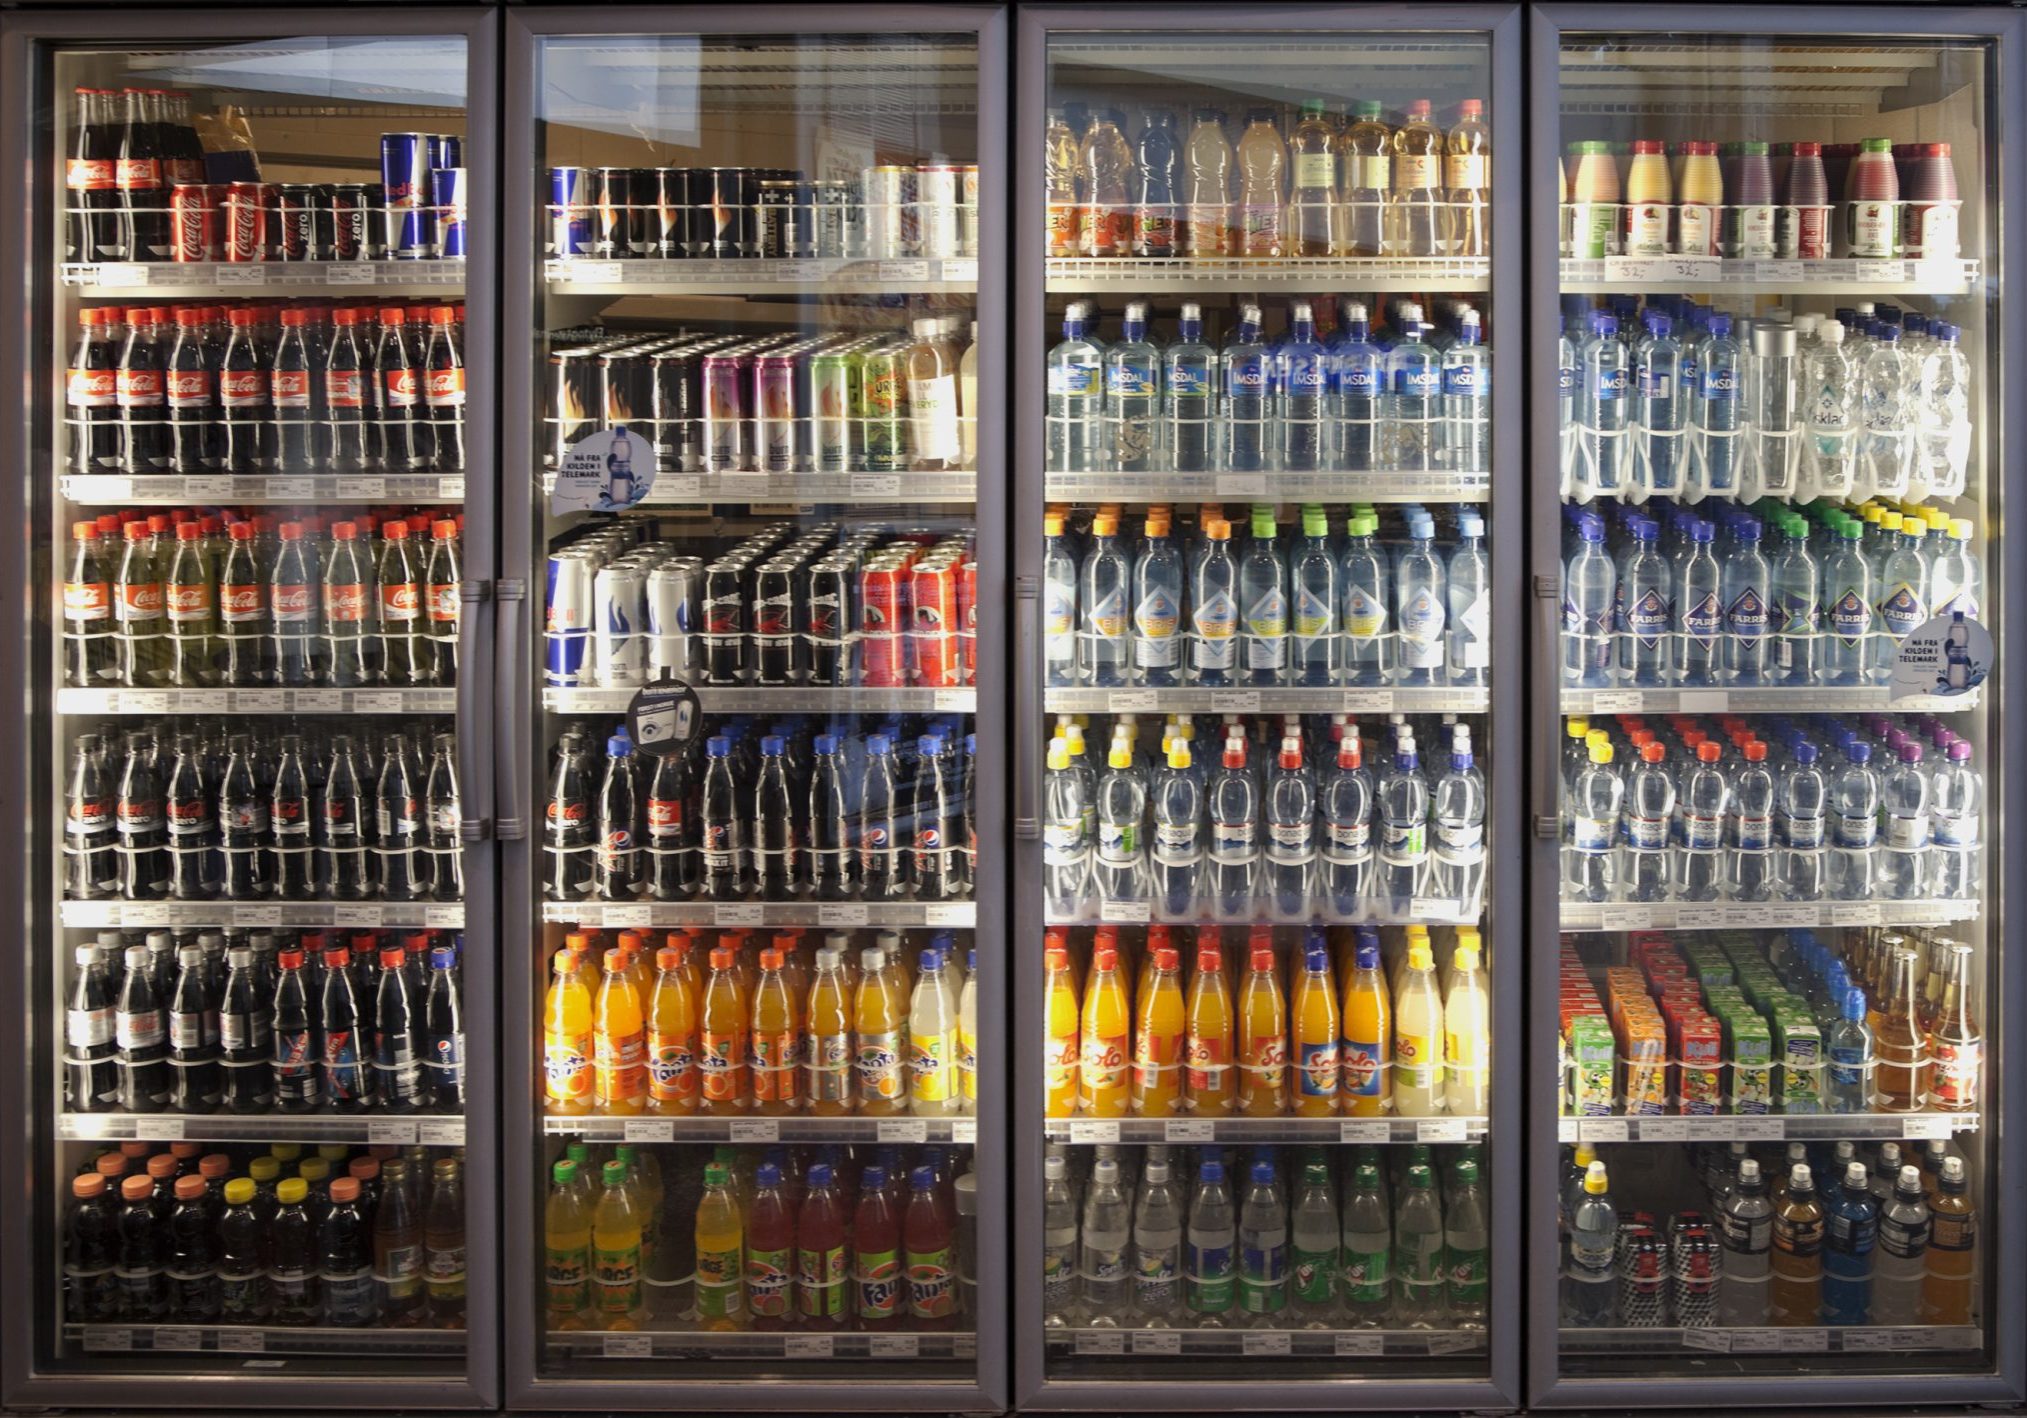 Oslo, Norway-February 22, 2011: Illuminated cooling shelf with a diverse range of soft drinks in a shop on the main train station selling refreshments.